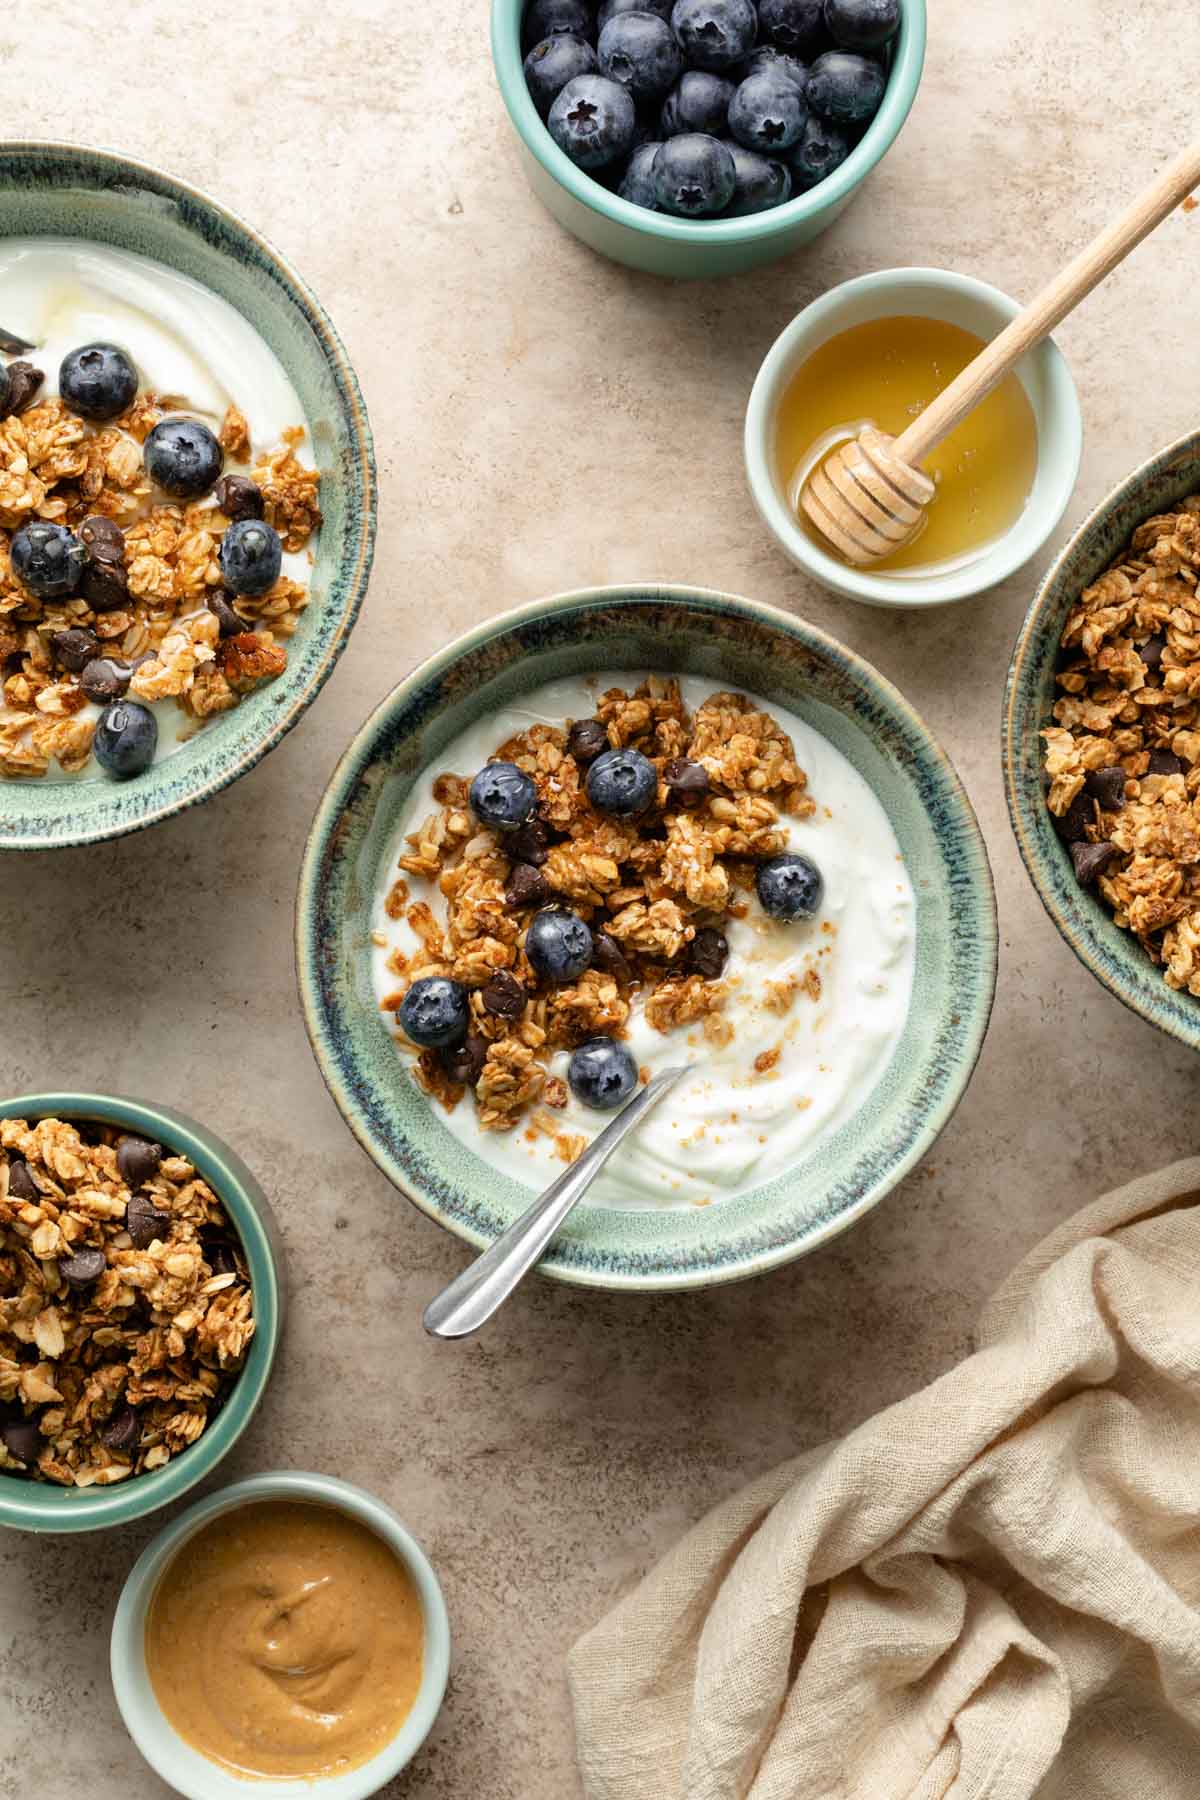 Overhead view of yogurt in green bowls and topped with peanut butter granola and blueberries.